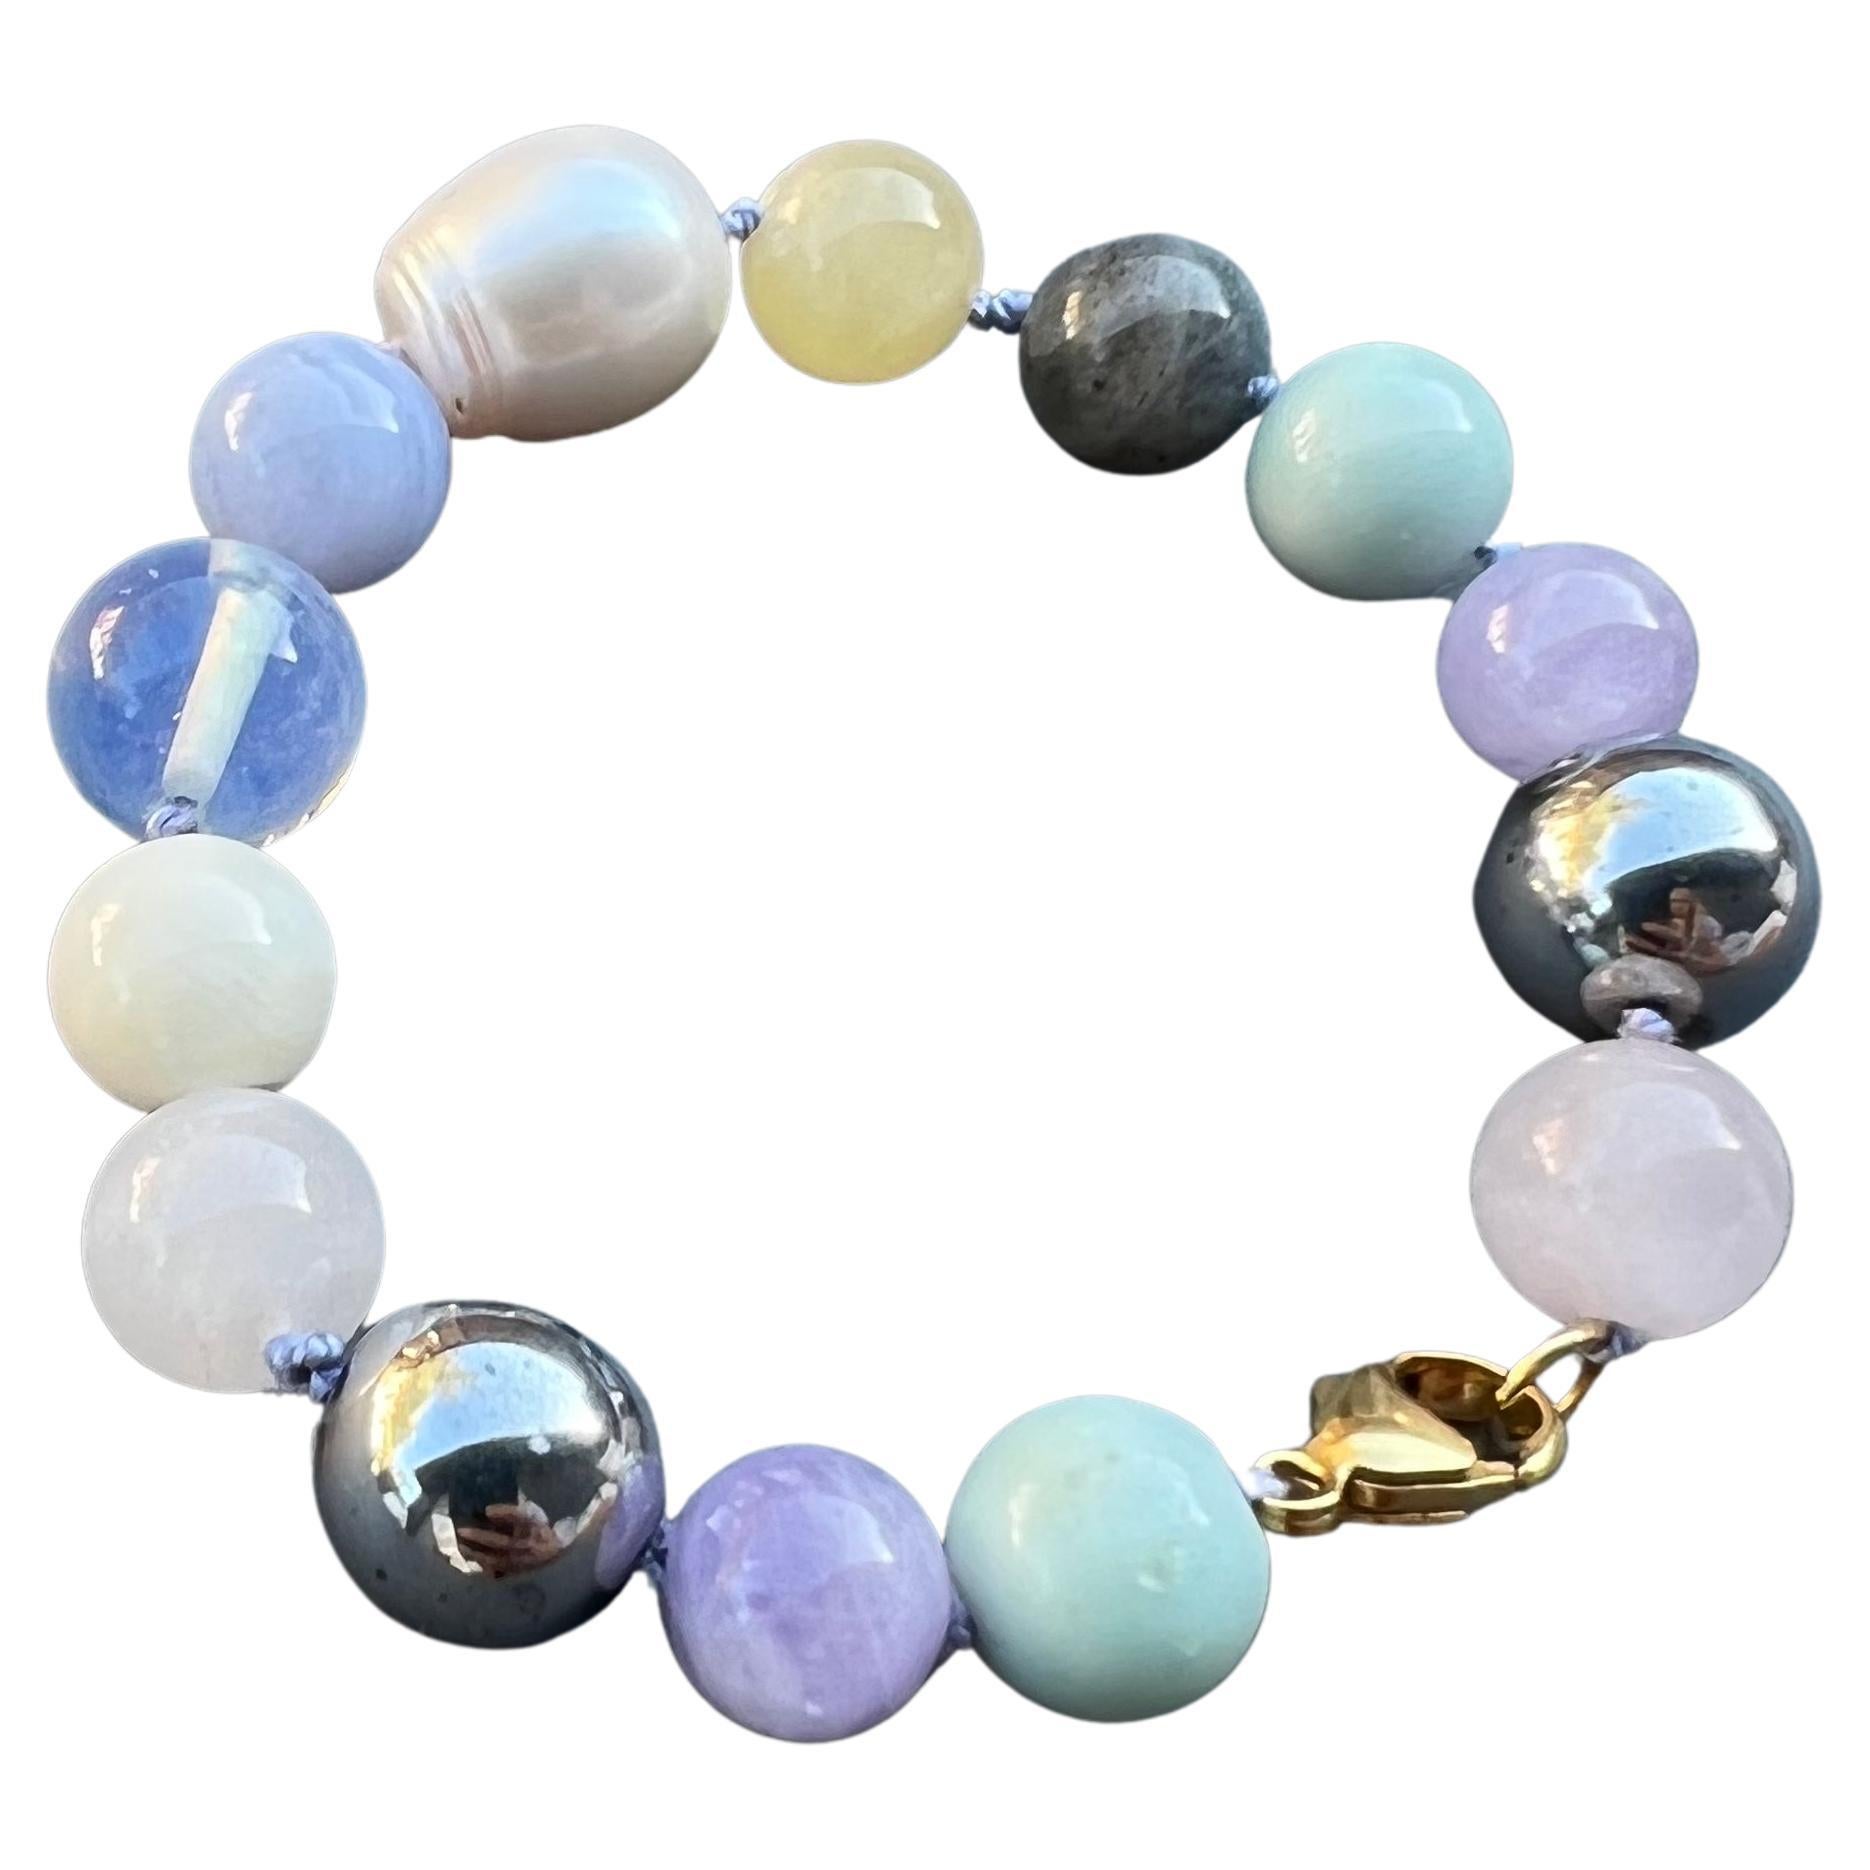 Bead Bracelet Multi color Multi Gem White Pearl 
Designer J Dauphin
Semi precious gems and Fresh water Pearl

Hand made in Los Angeles with Pastel Silk Threads
